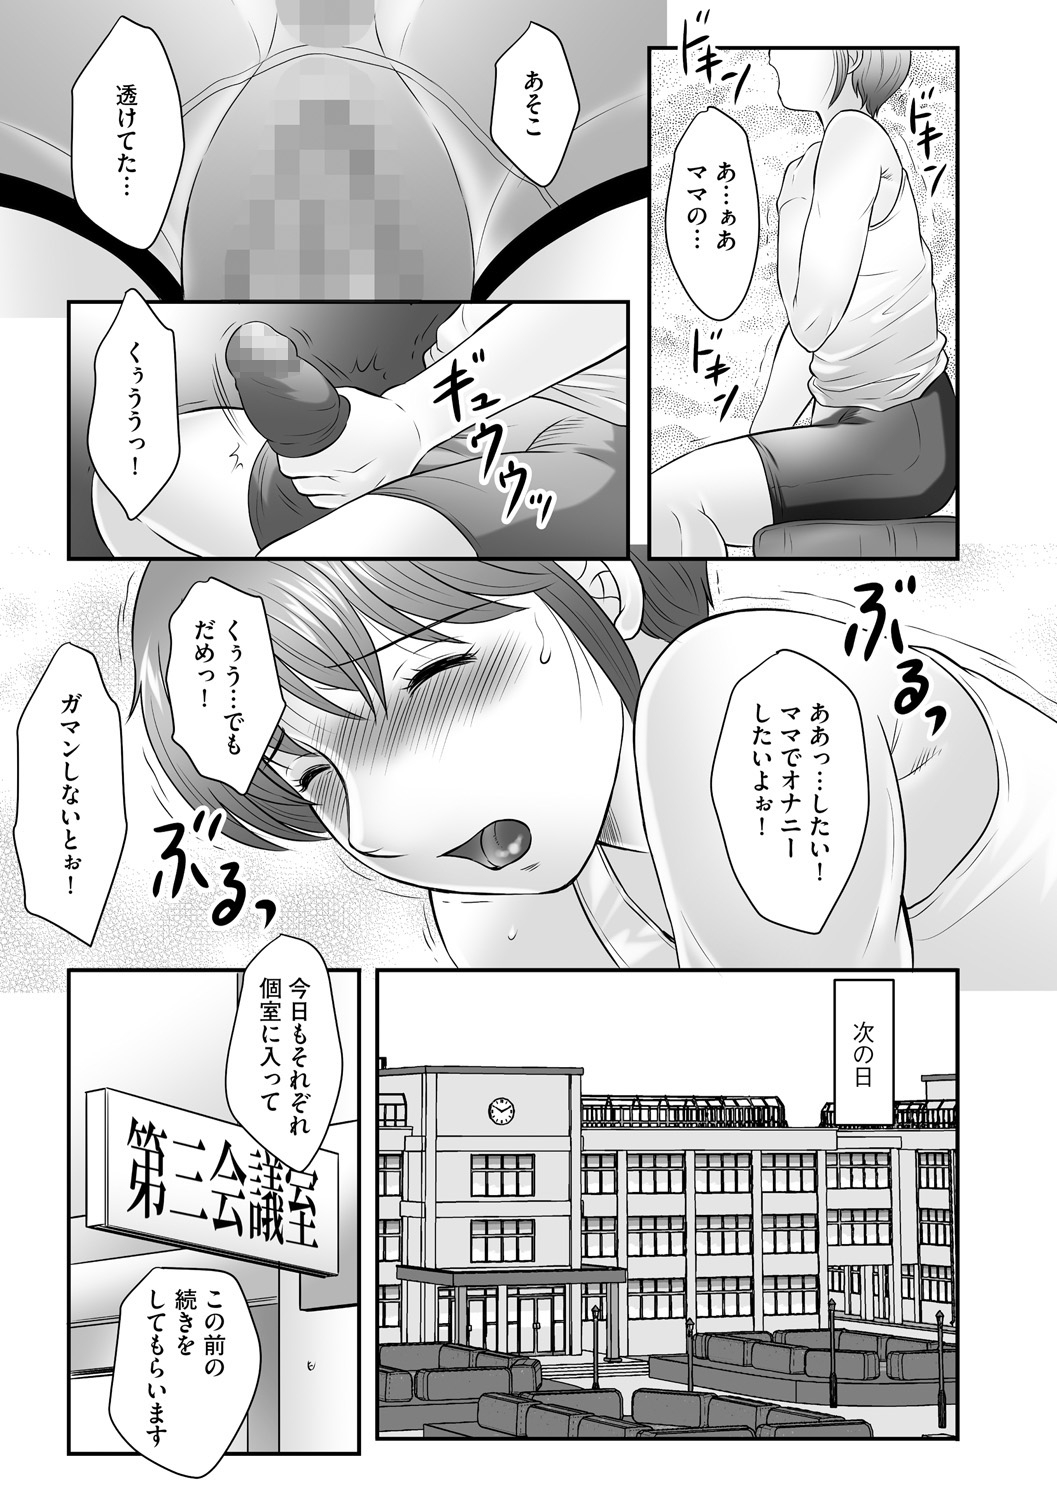 [Fuusen Club] Boshi no Susume - The advice of the mother and child Ch. 6 page 9 full